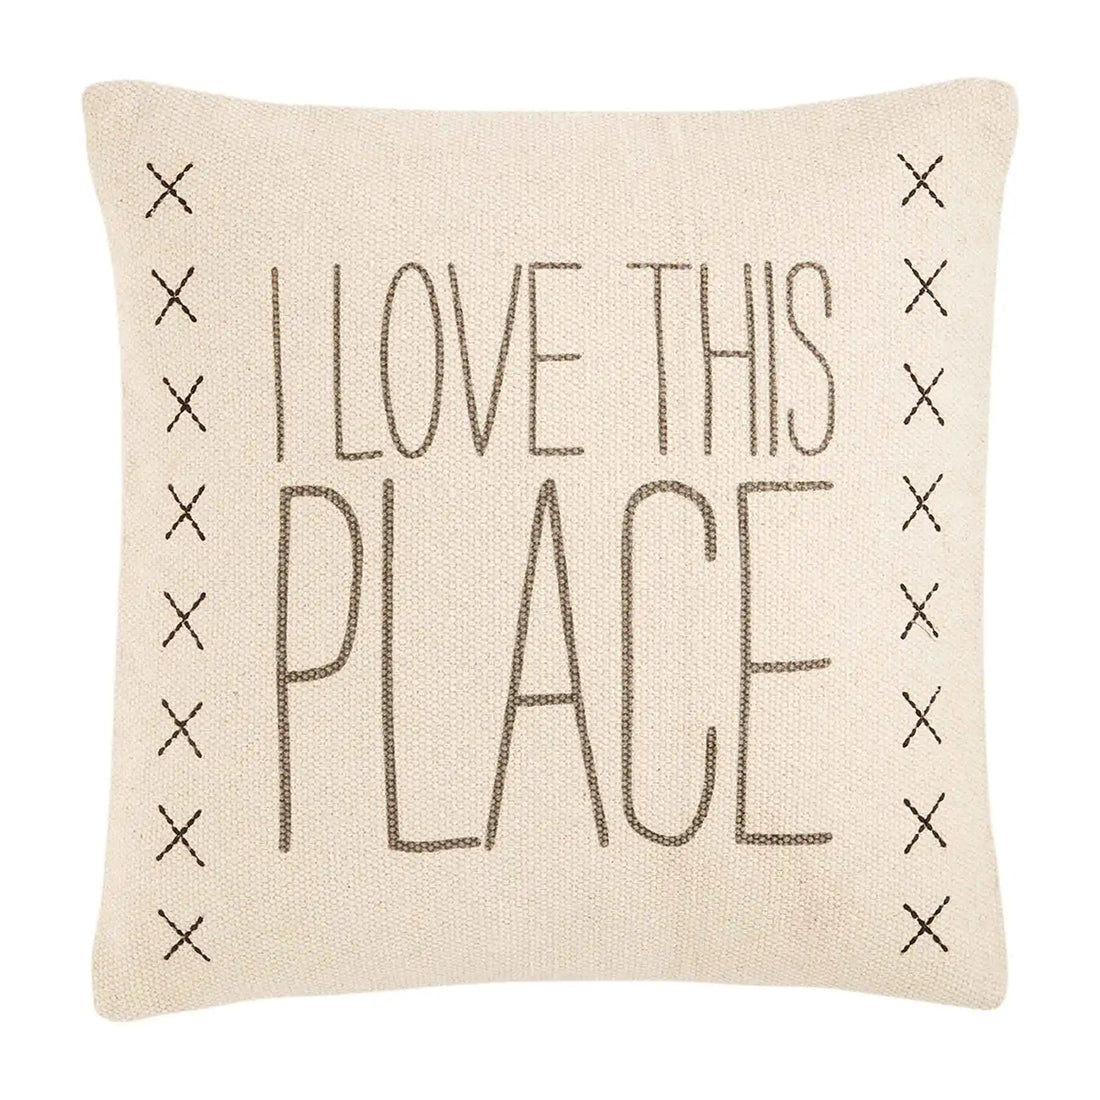 I Love This Place Pillow